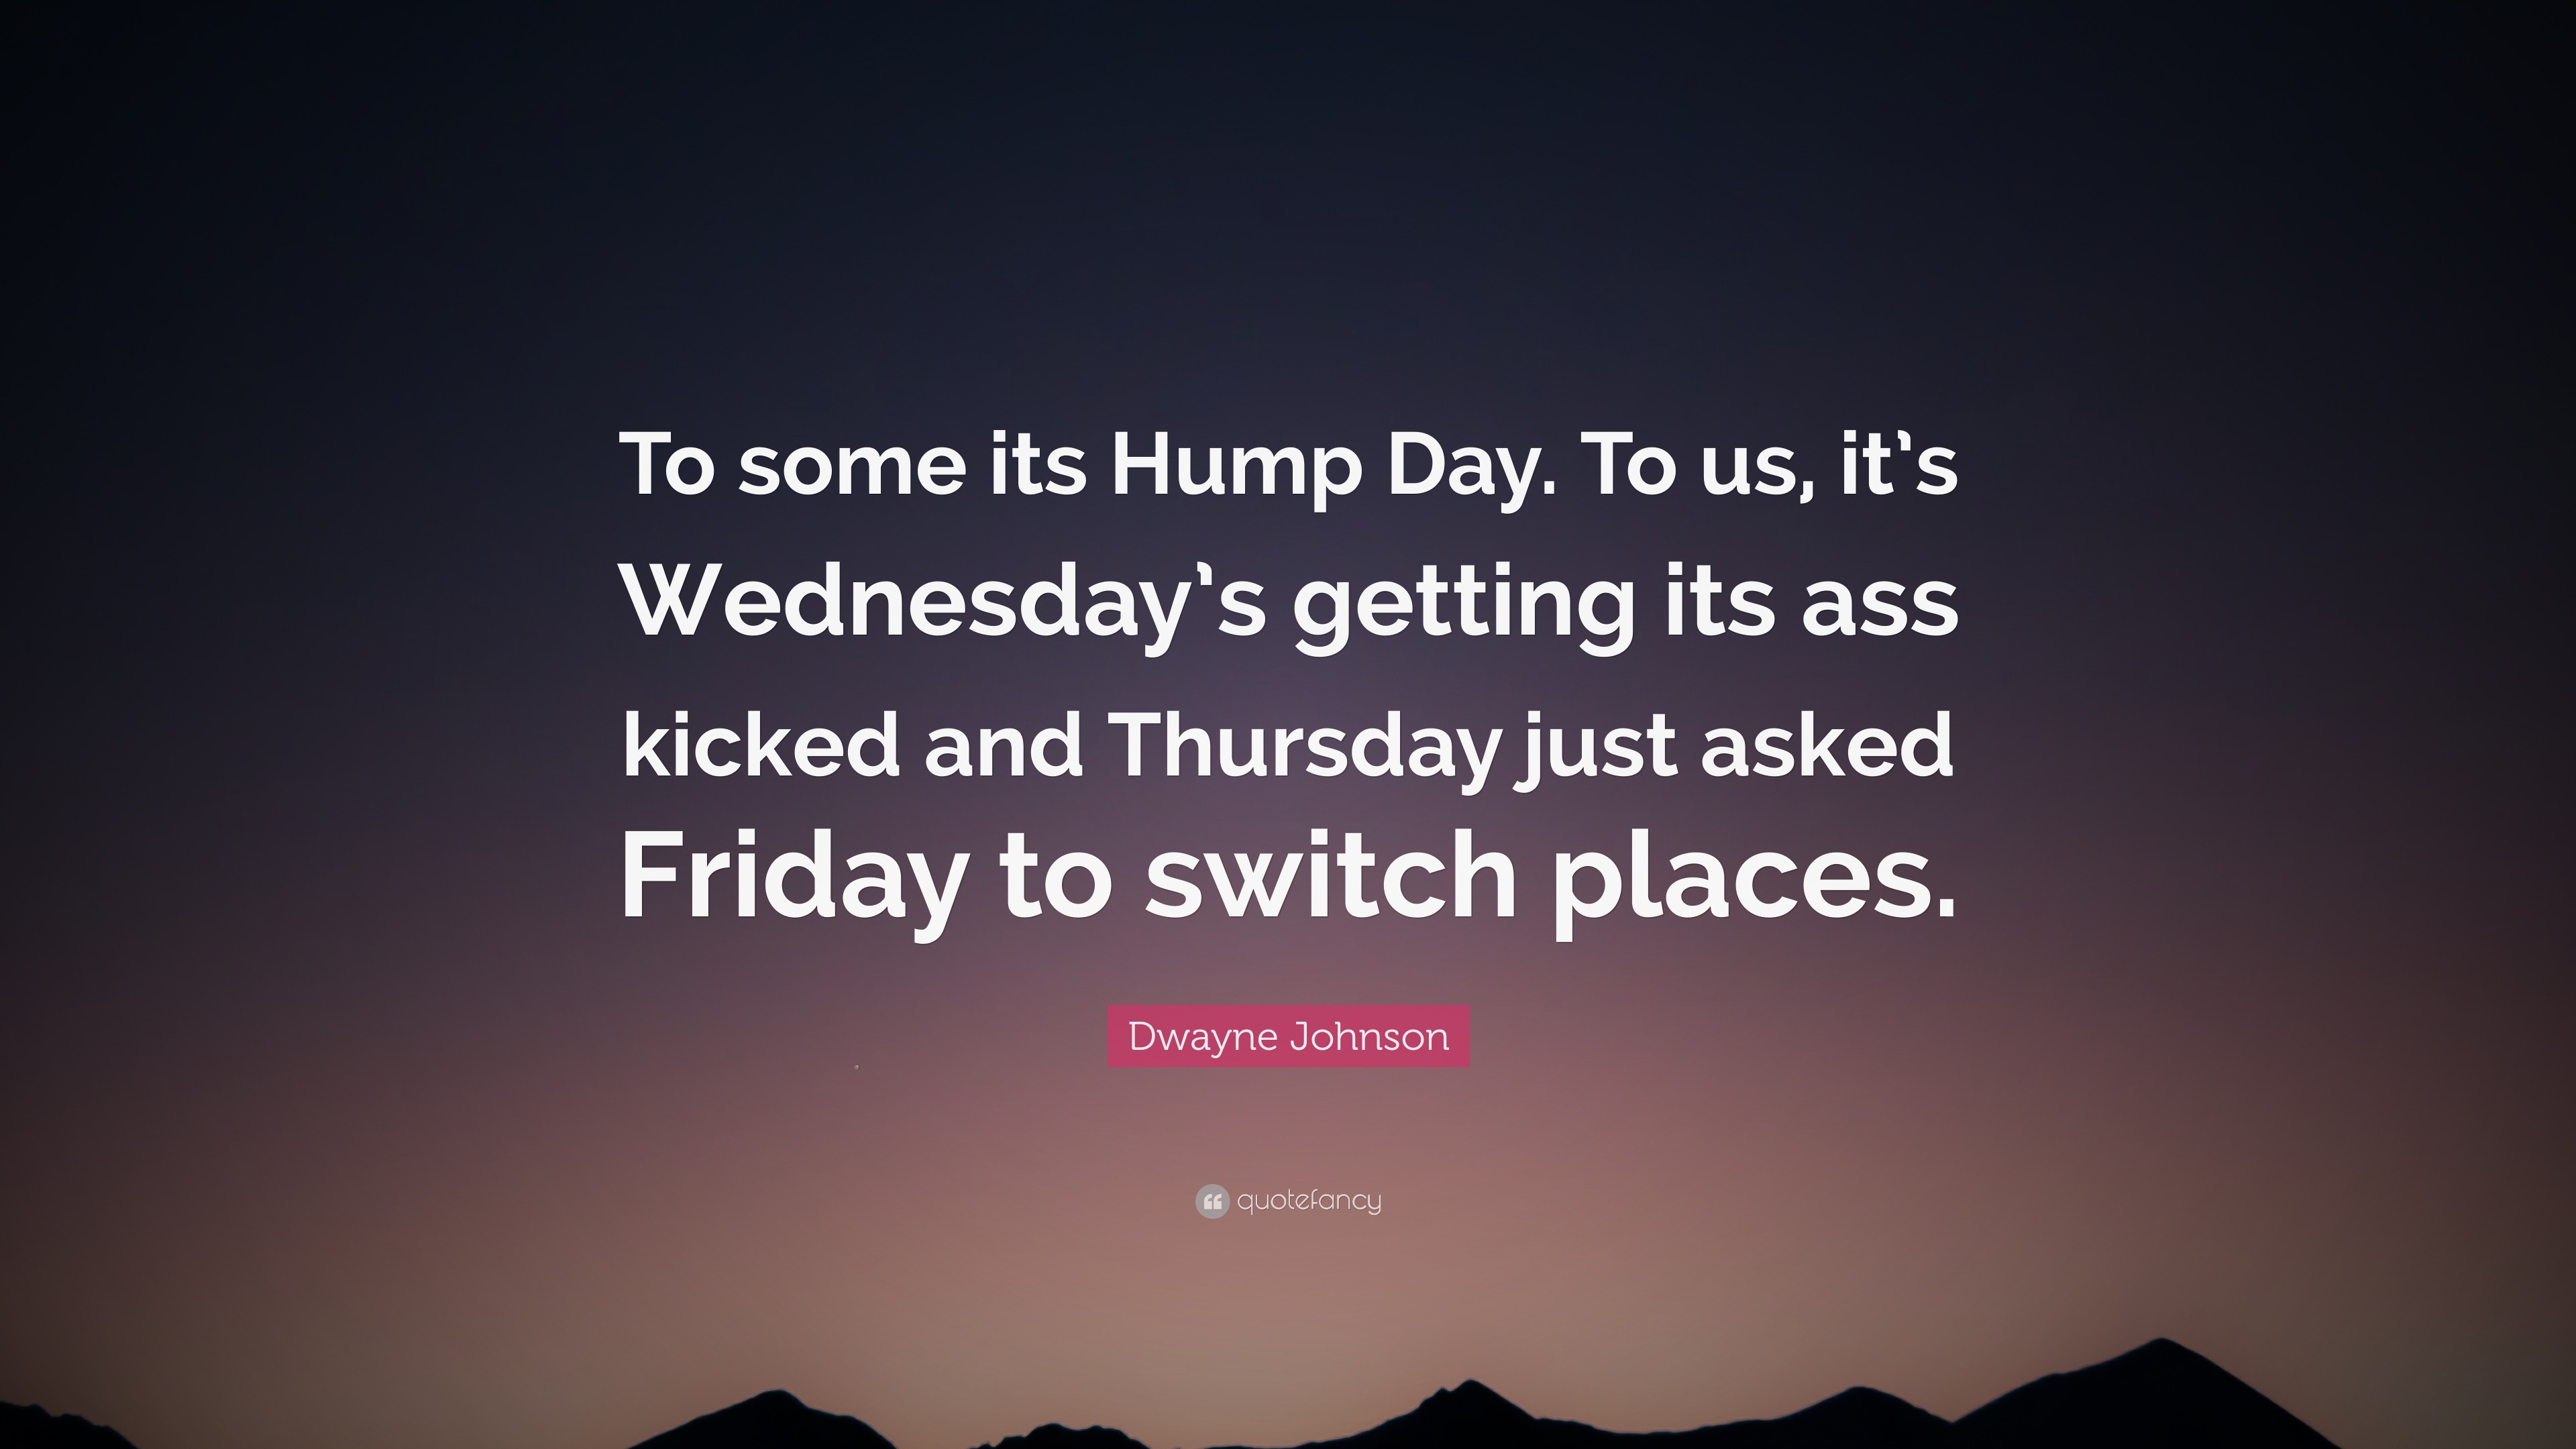 Dwayne Johnson Quote: “To some its Hump Day. To us, it's Wednesday's  getting its ass kicked